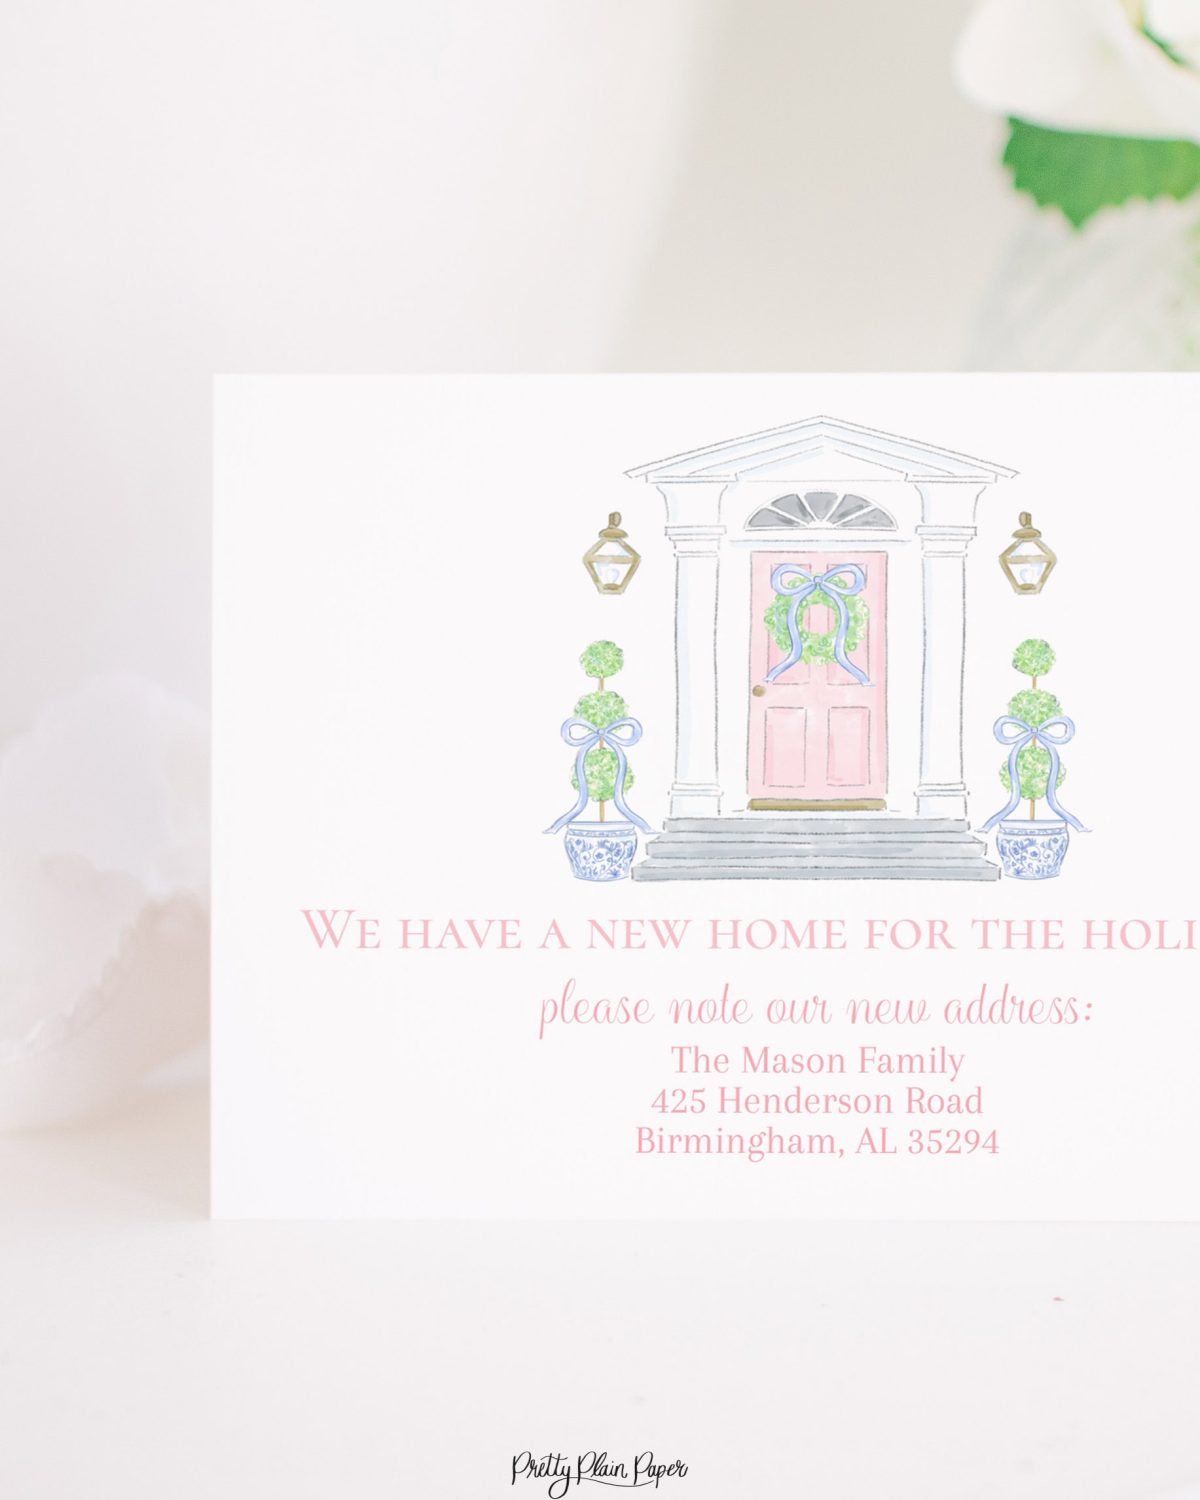 Watercolor Christmas Card with Photo by Pretty Plain Paper a Grandmillennial Christmas Card with Pink Bow and Green Wreath New Home or Moving Announcement, We've Moved Holiday Card Insert for New Address with Blue and White Chinoiserie Topiary